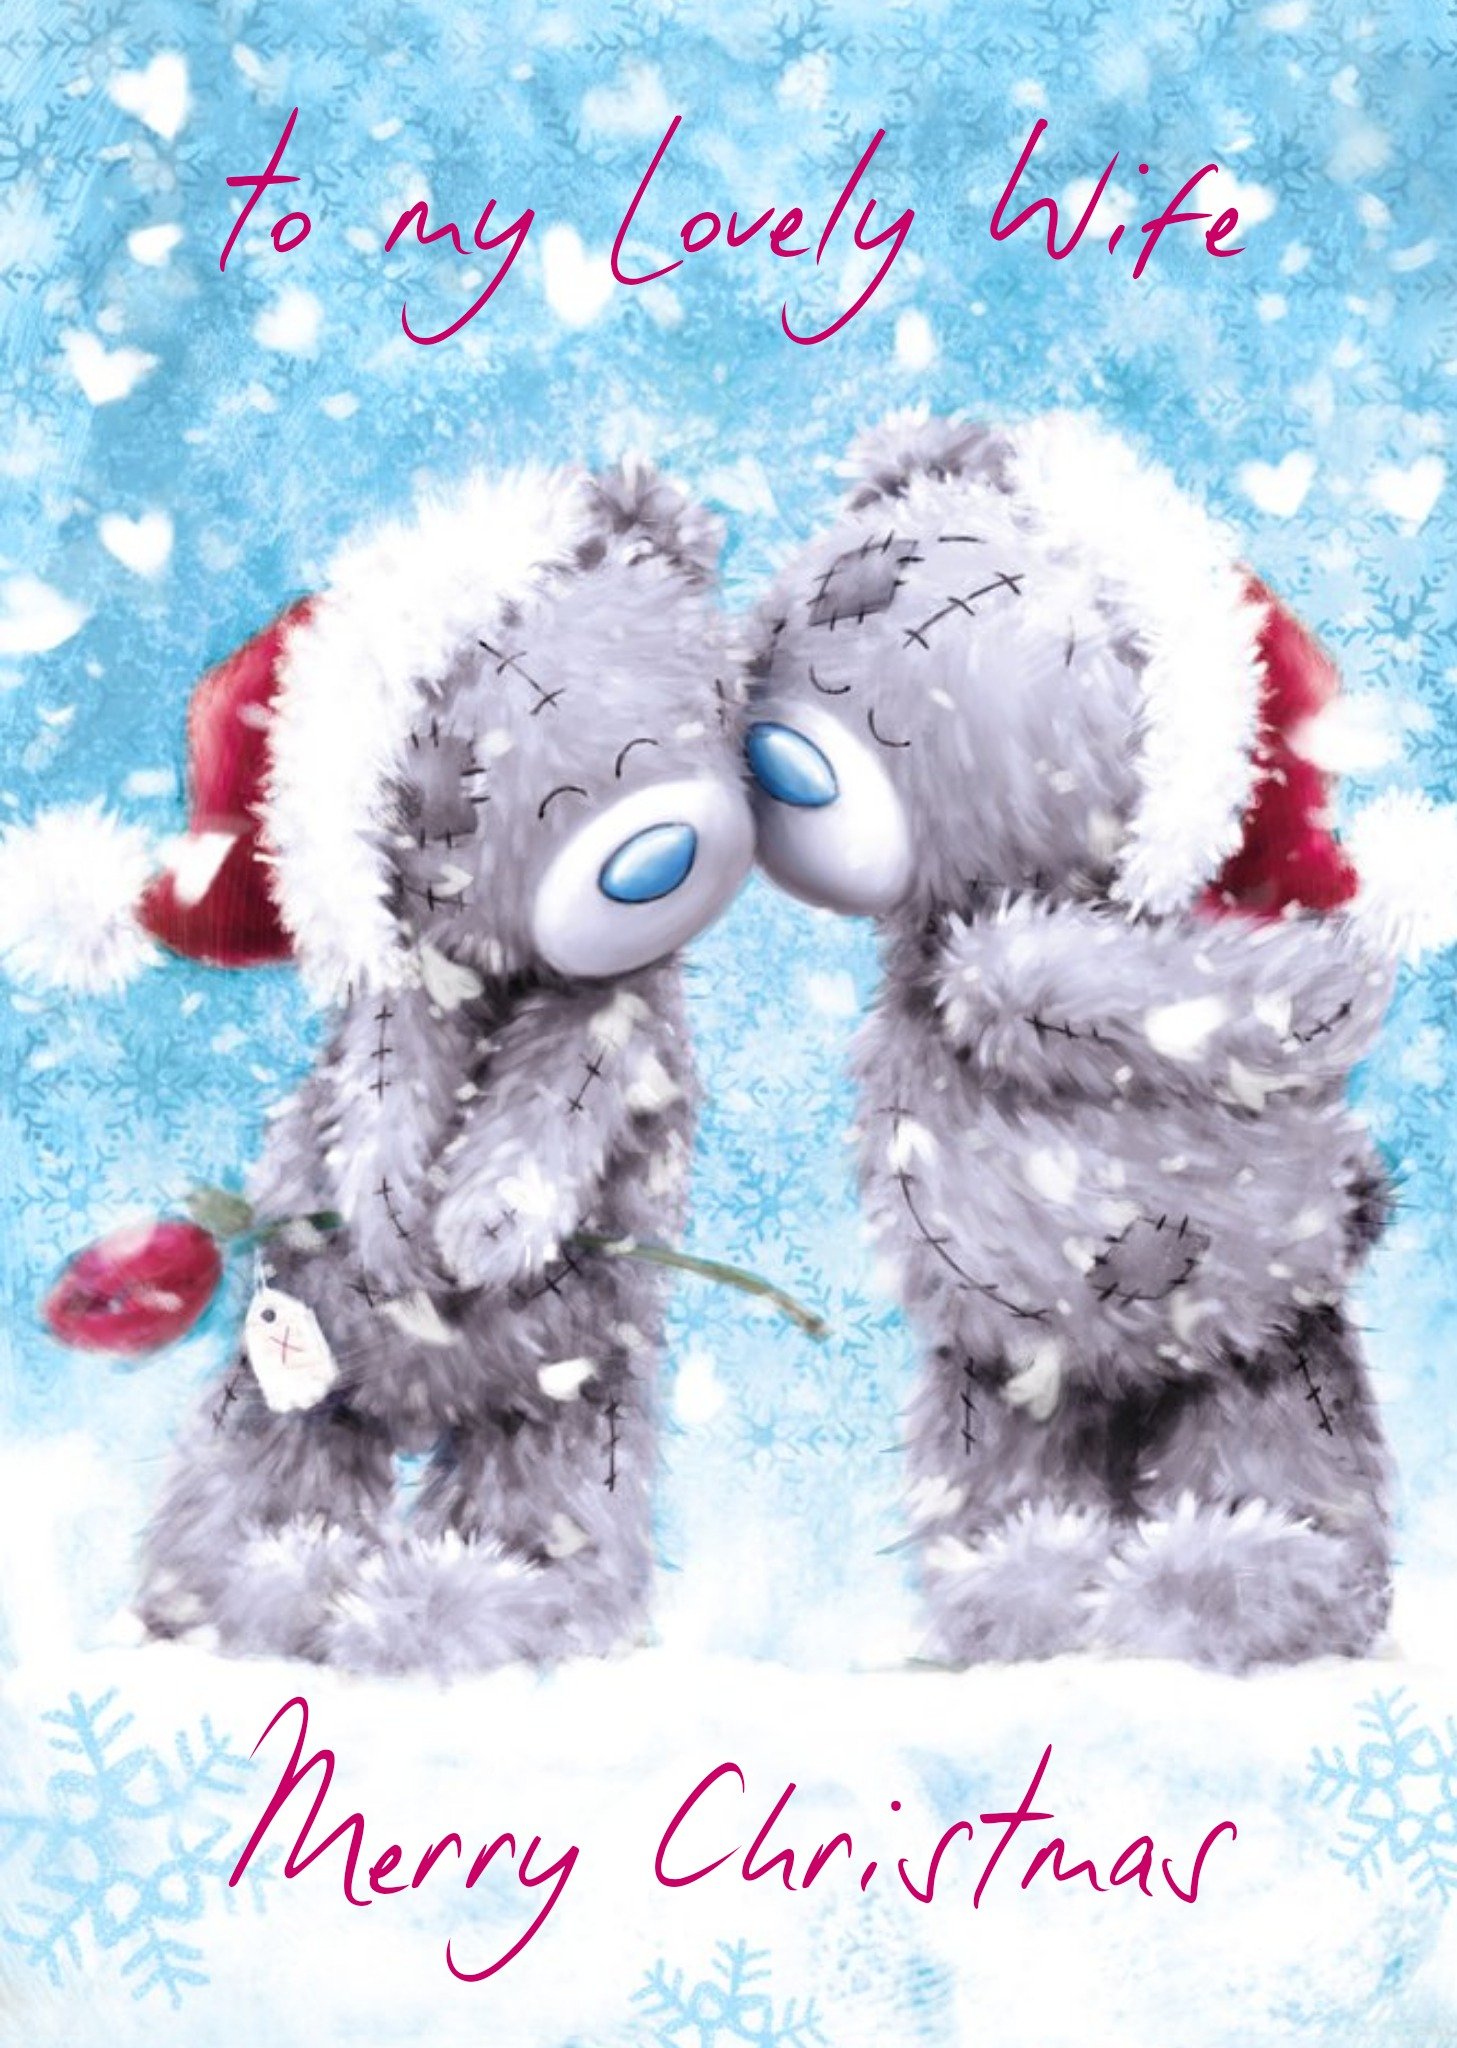 Me To You Tatty Teddy To My Lovely Wife Christmas Card Ecard